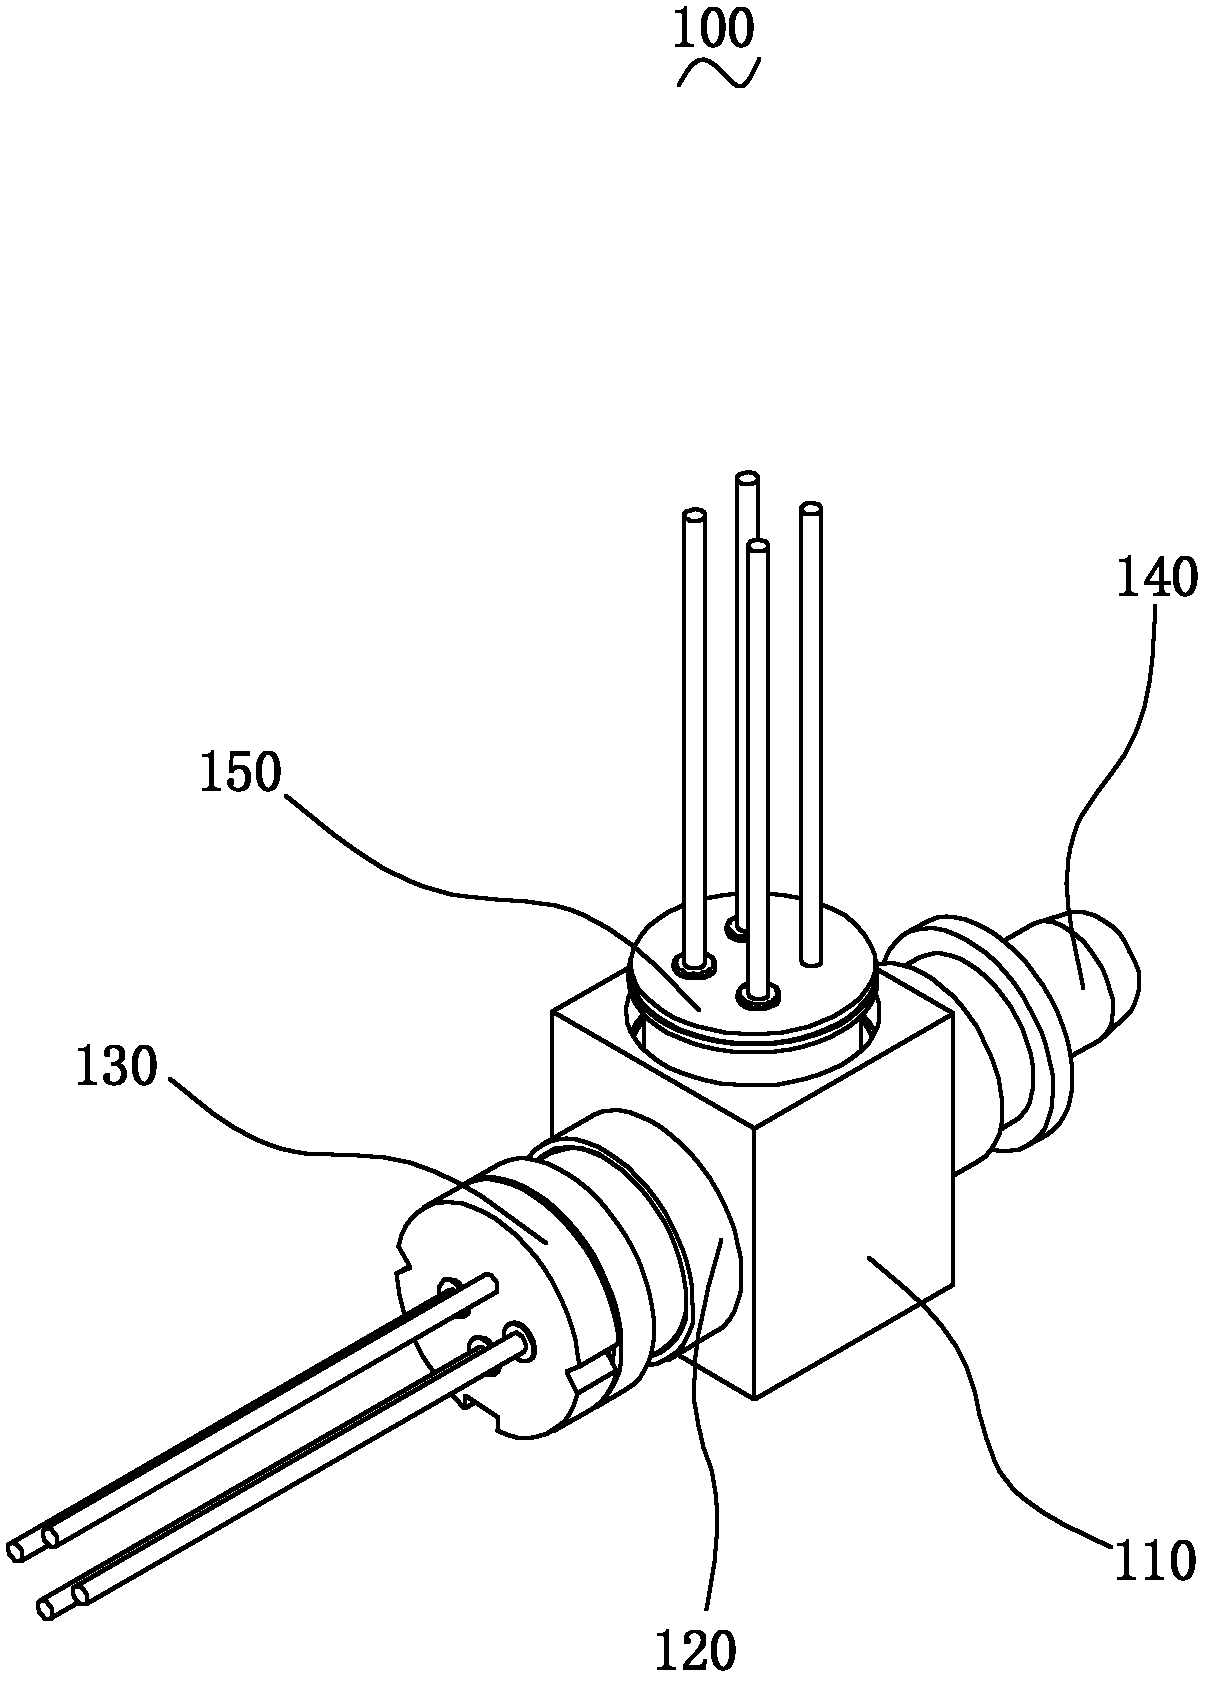 Single-fiber bidirectional component and packaging method thereof